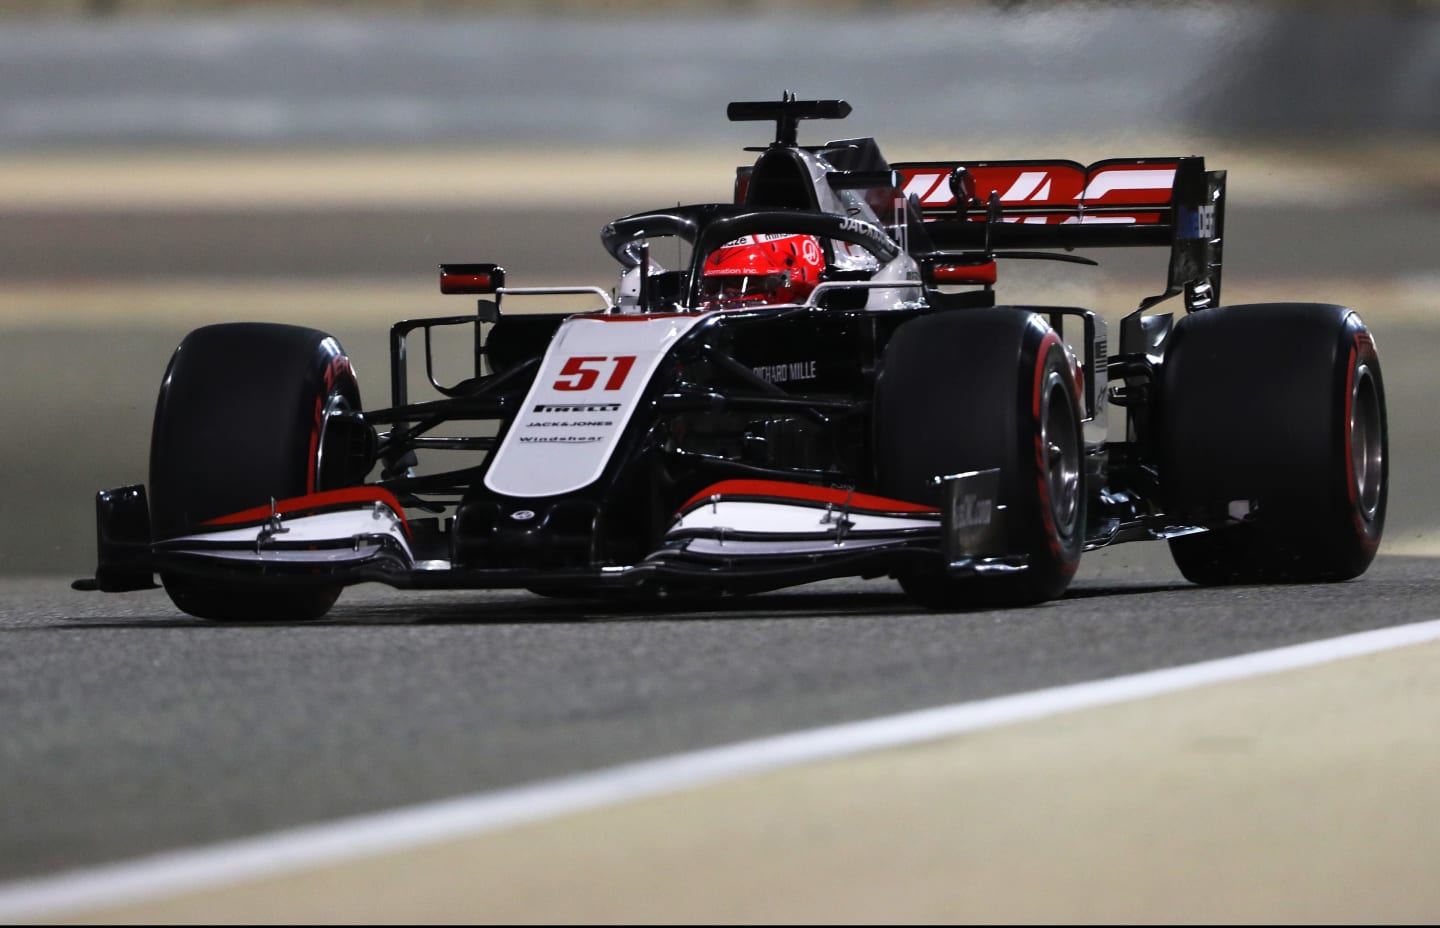 BAHRAIN, BAHRAIN - DECEMBER 04: Pietro Fittipaldi of Brazil driving the (51) Haas F1 Team VF-20 Ferrari on track during practice ahead of the F1 Grand Prix of Sakhir at Bahrain International Circuit on December 04, 2020 in Bahrain, Bahrain. (Photo by Kamran Jebreili - Pool/Getty Images)